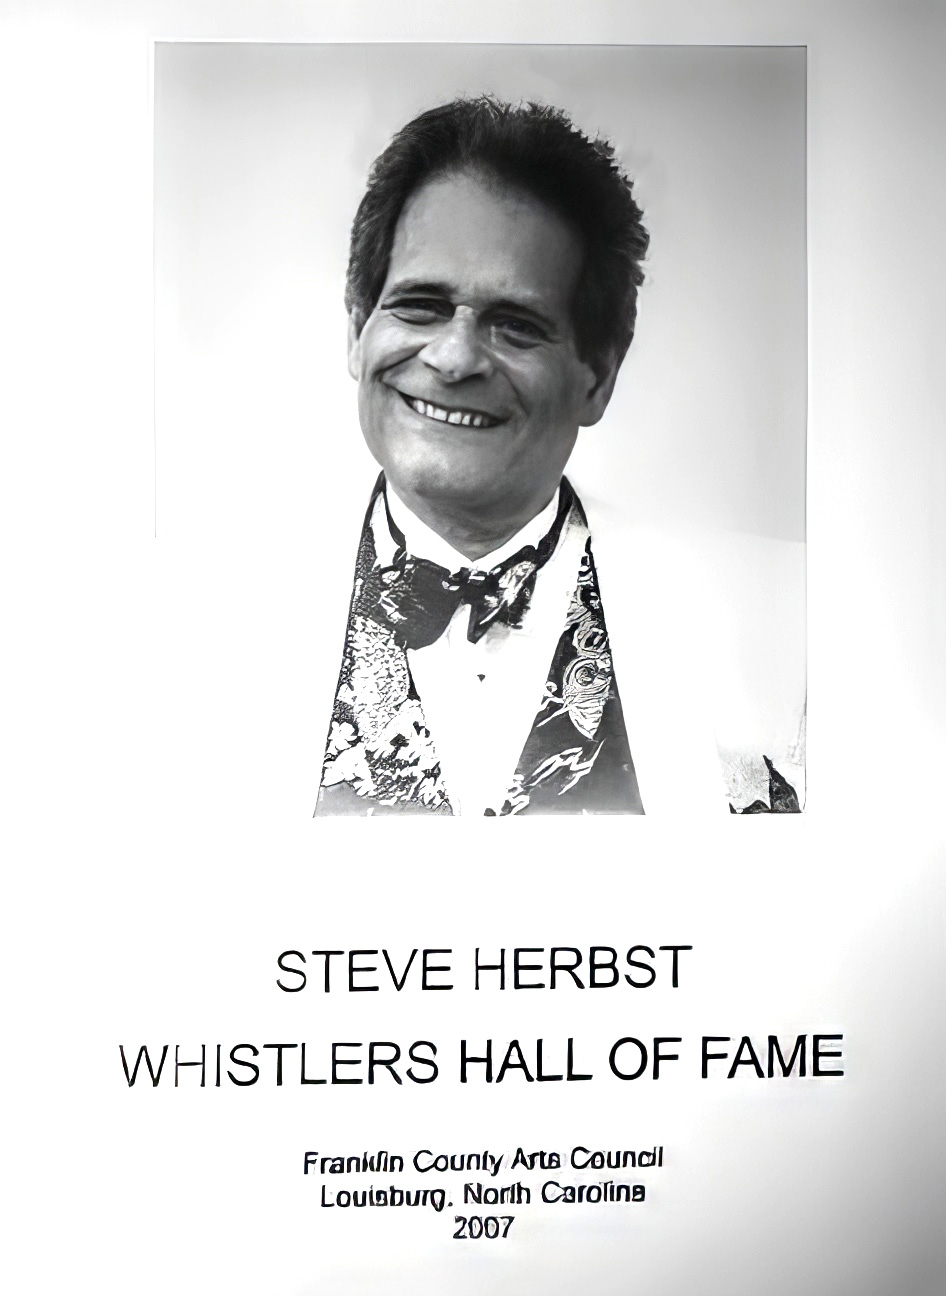 Steve was the Winner of the 2007 Whistlers Hall of Fame